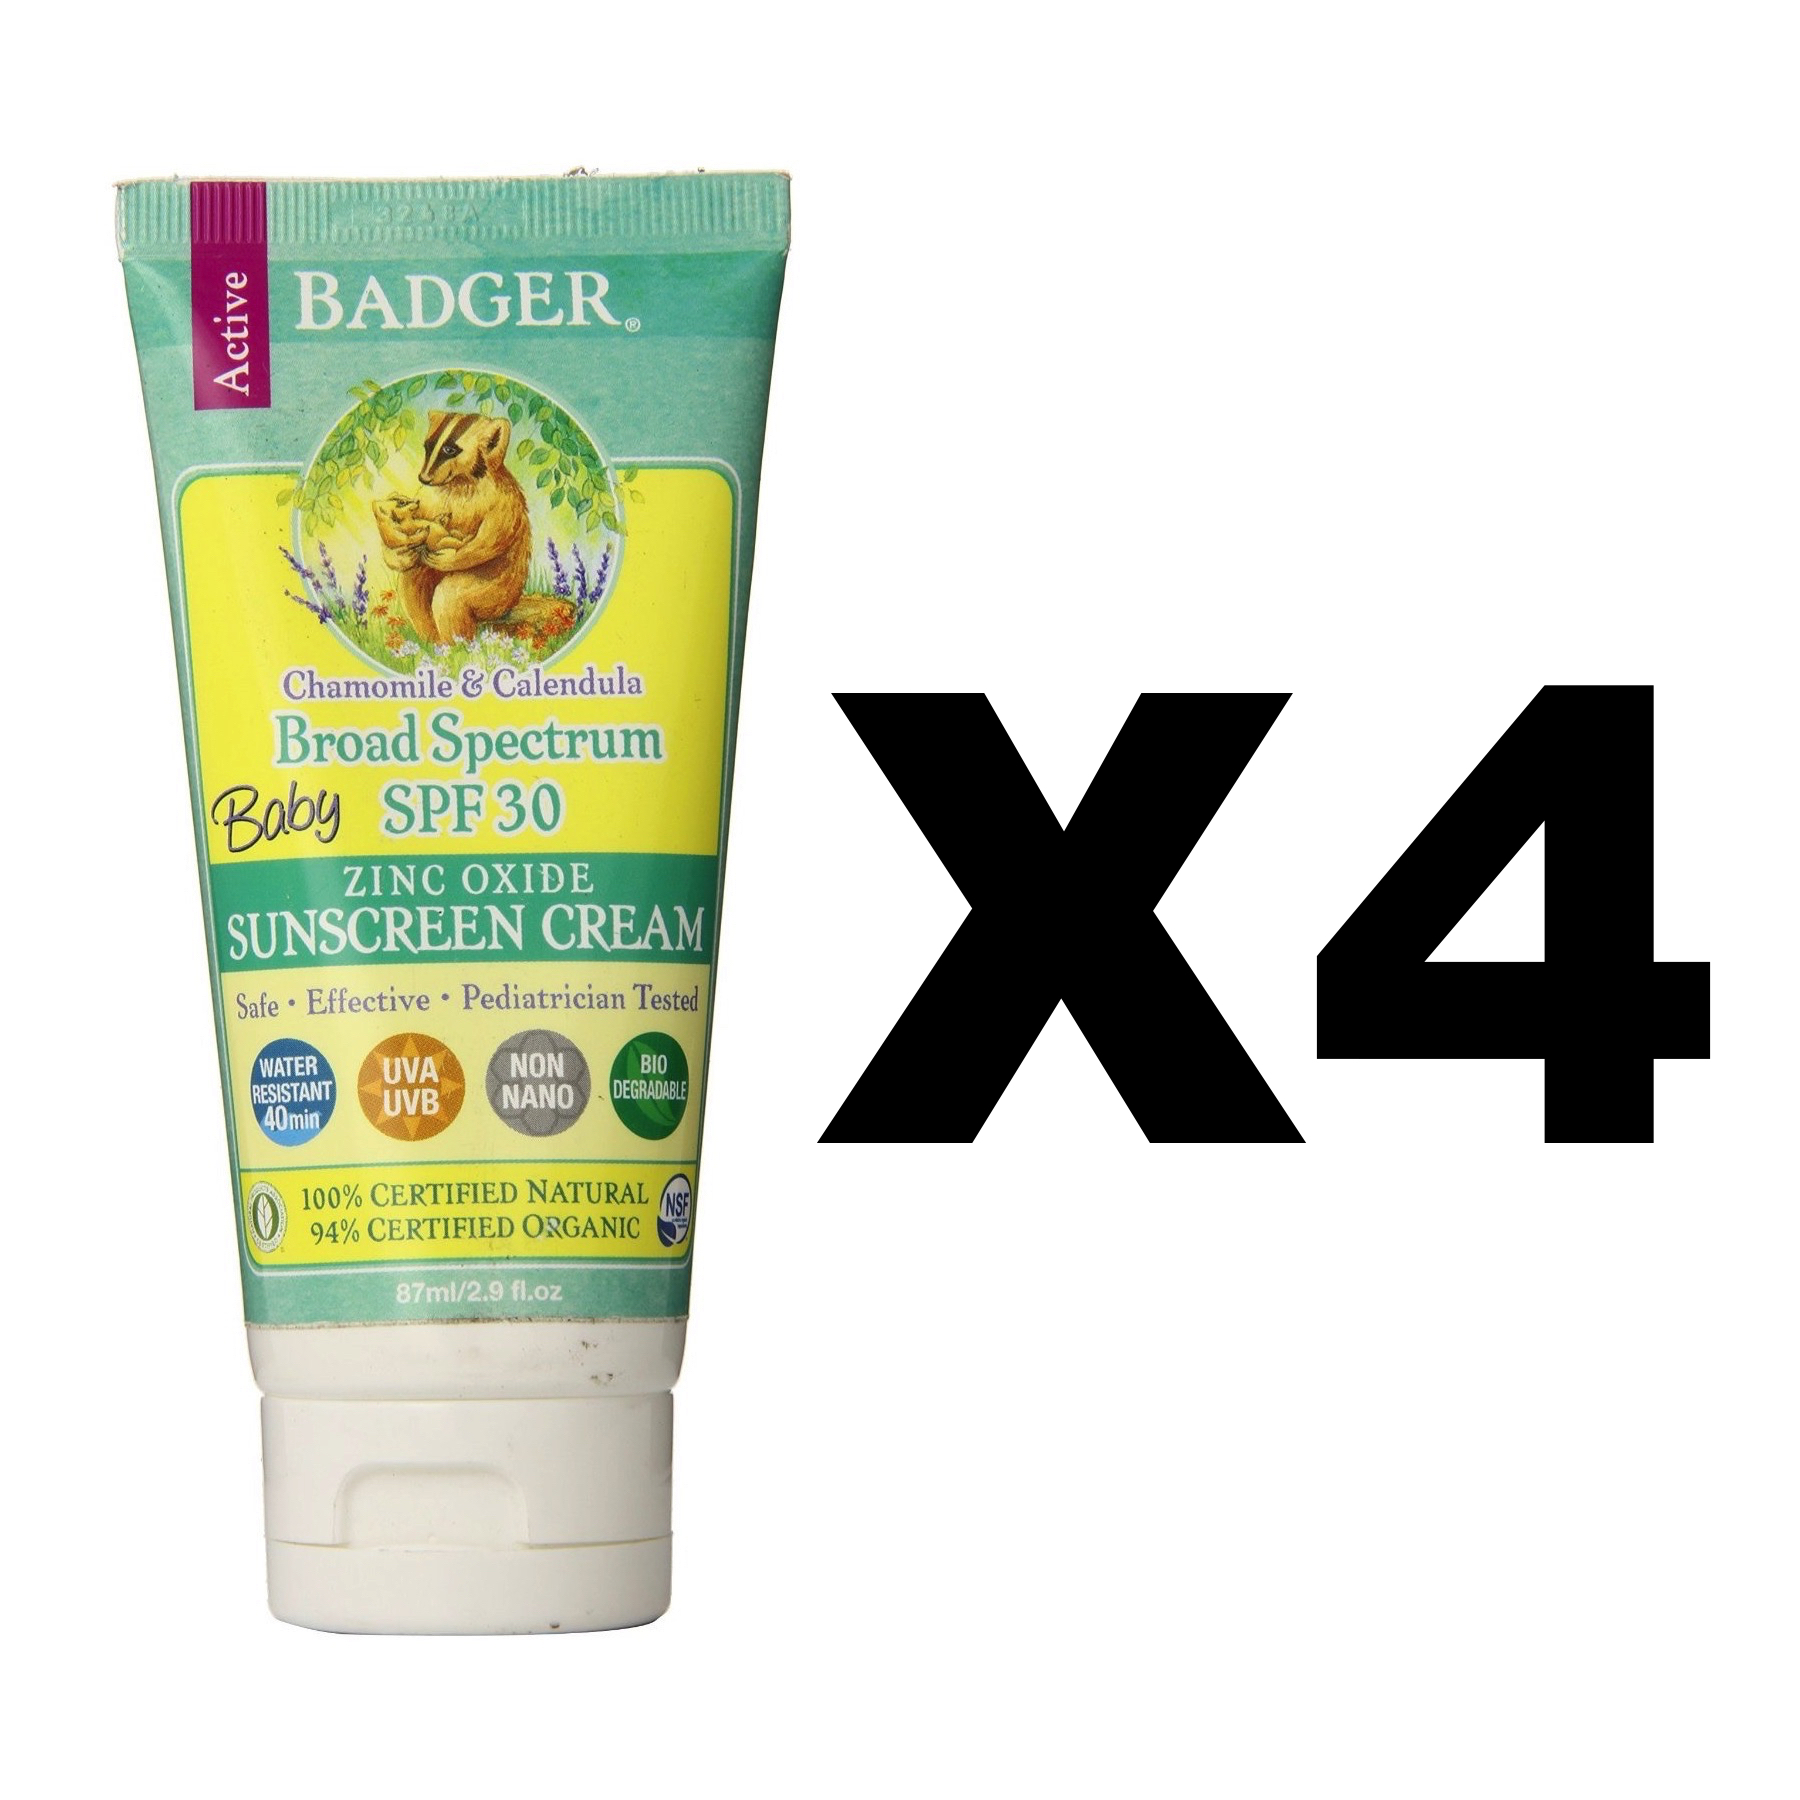 does badger sunscreen expire